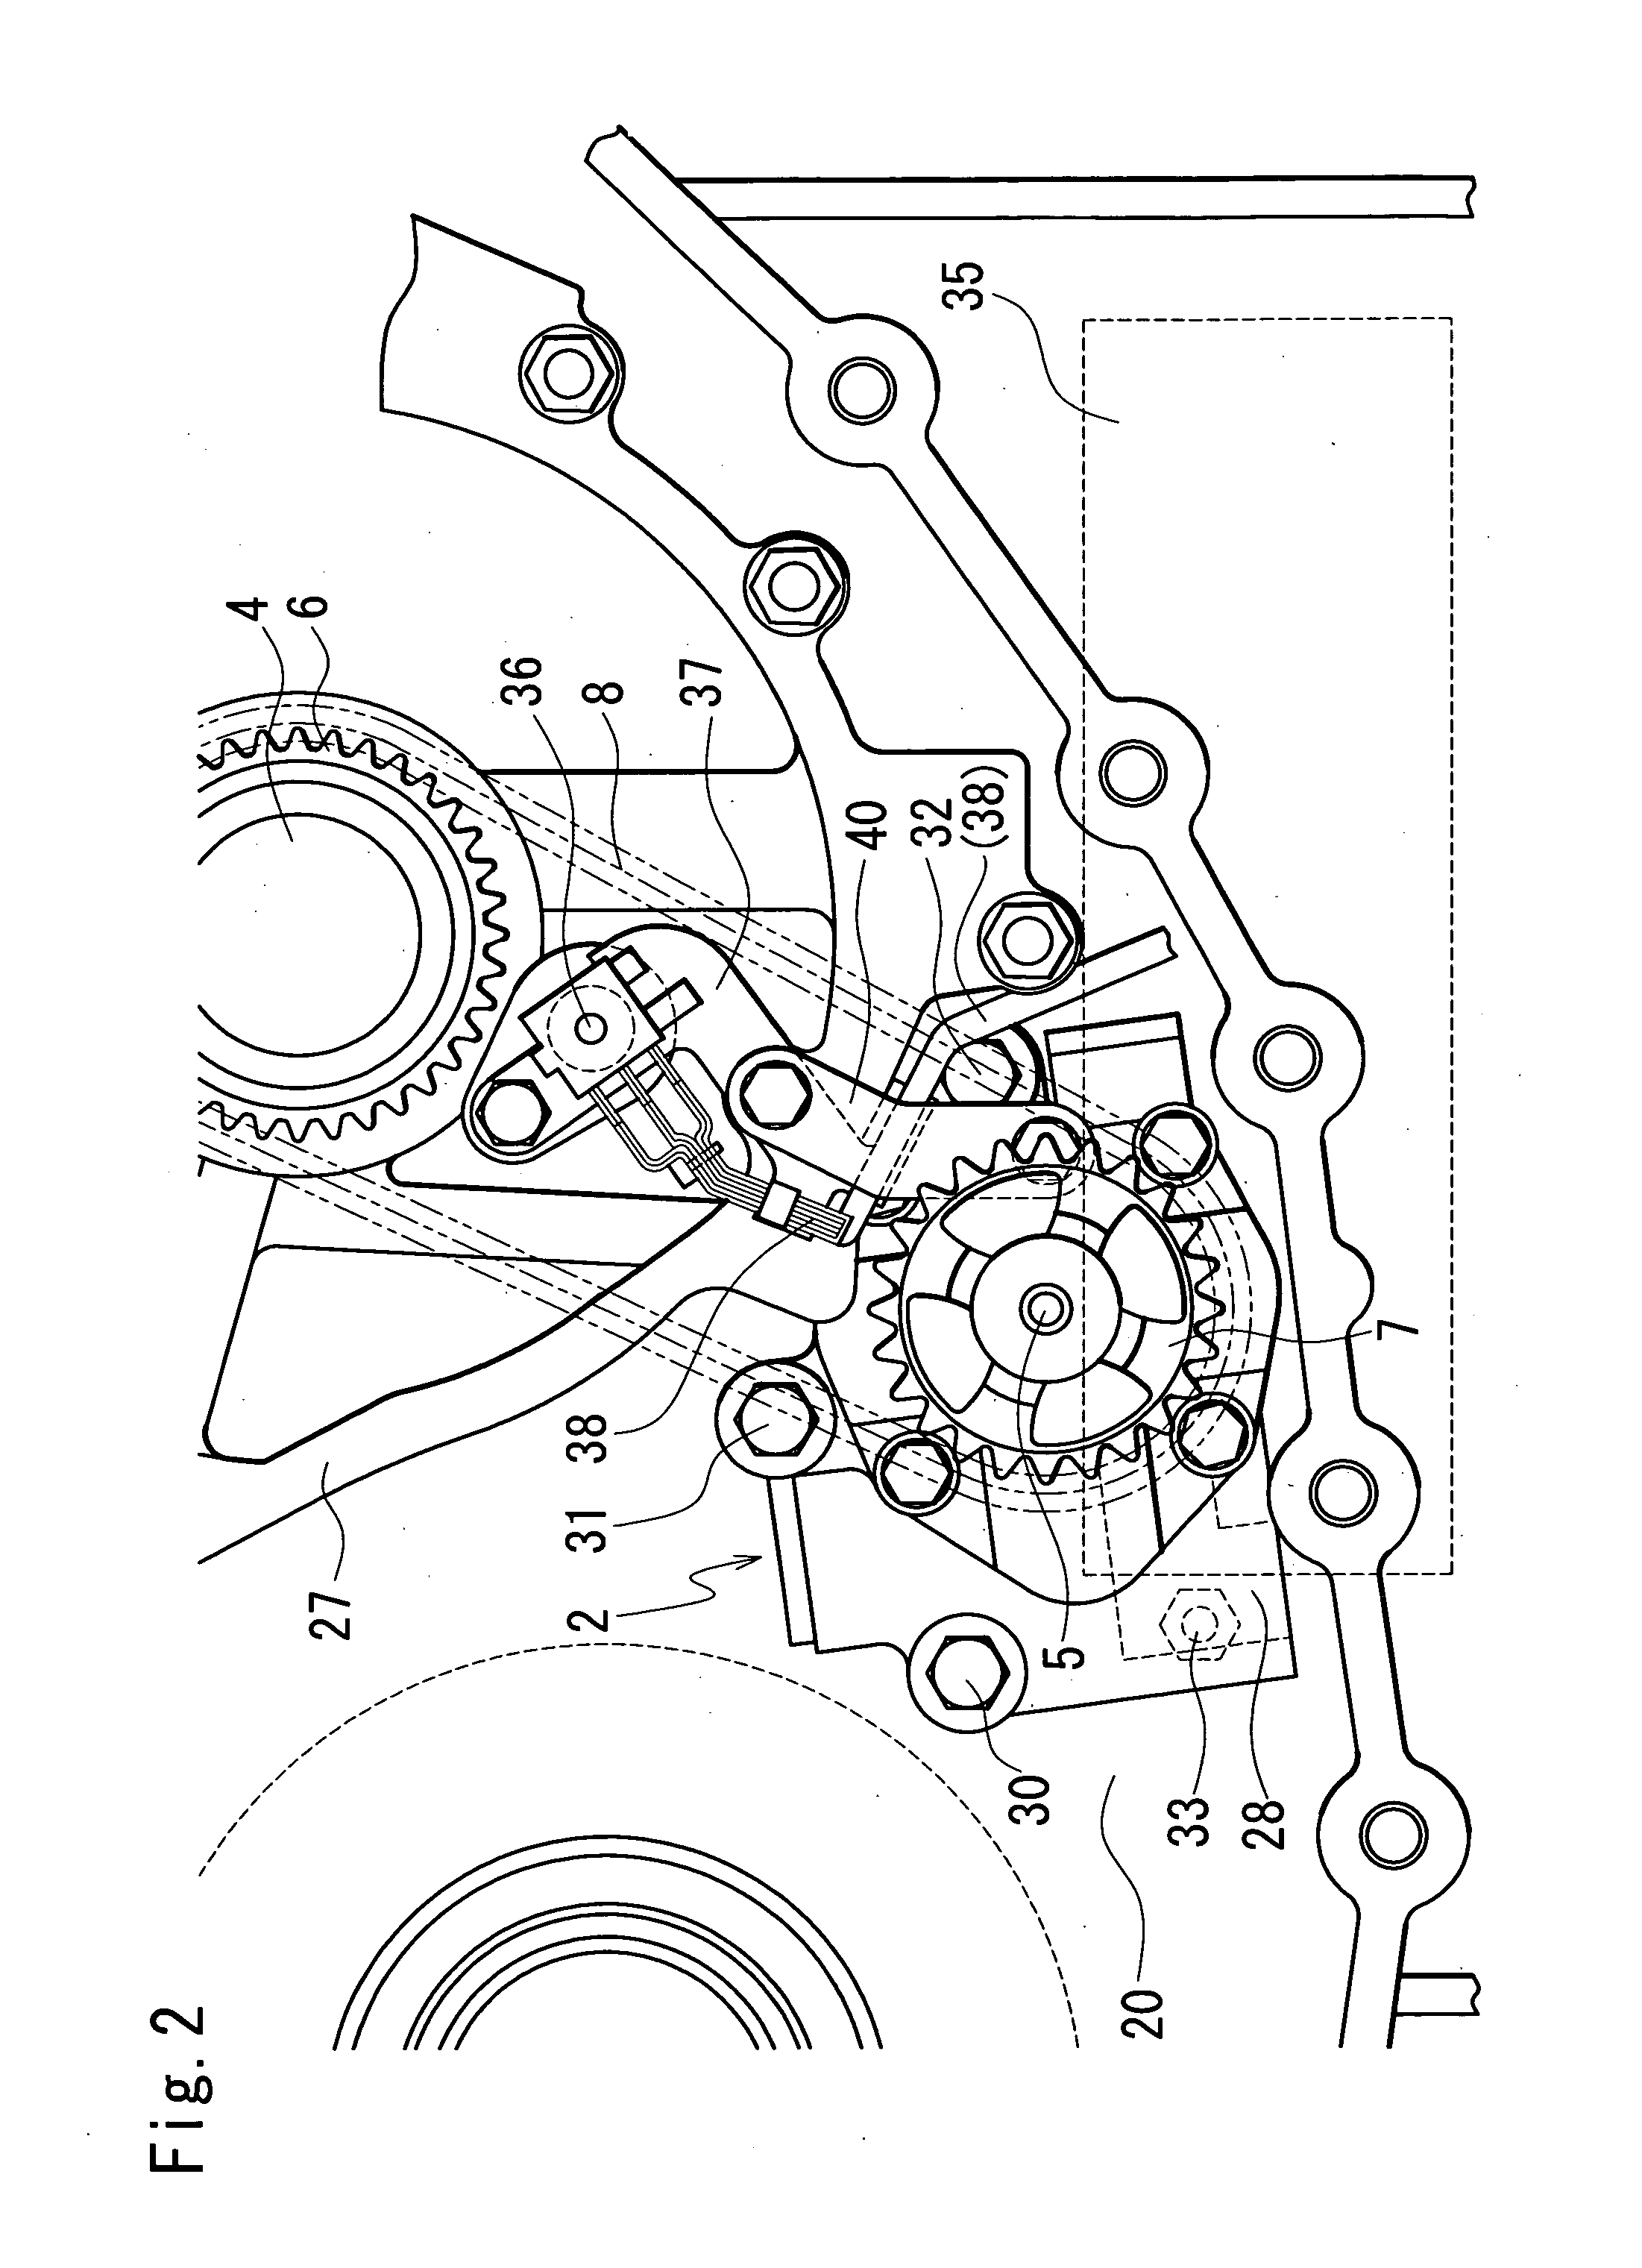 Oil pump supporting structure of automatic transmission